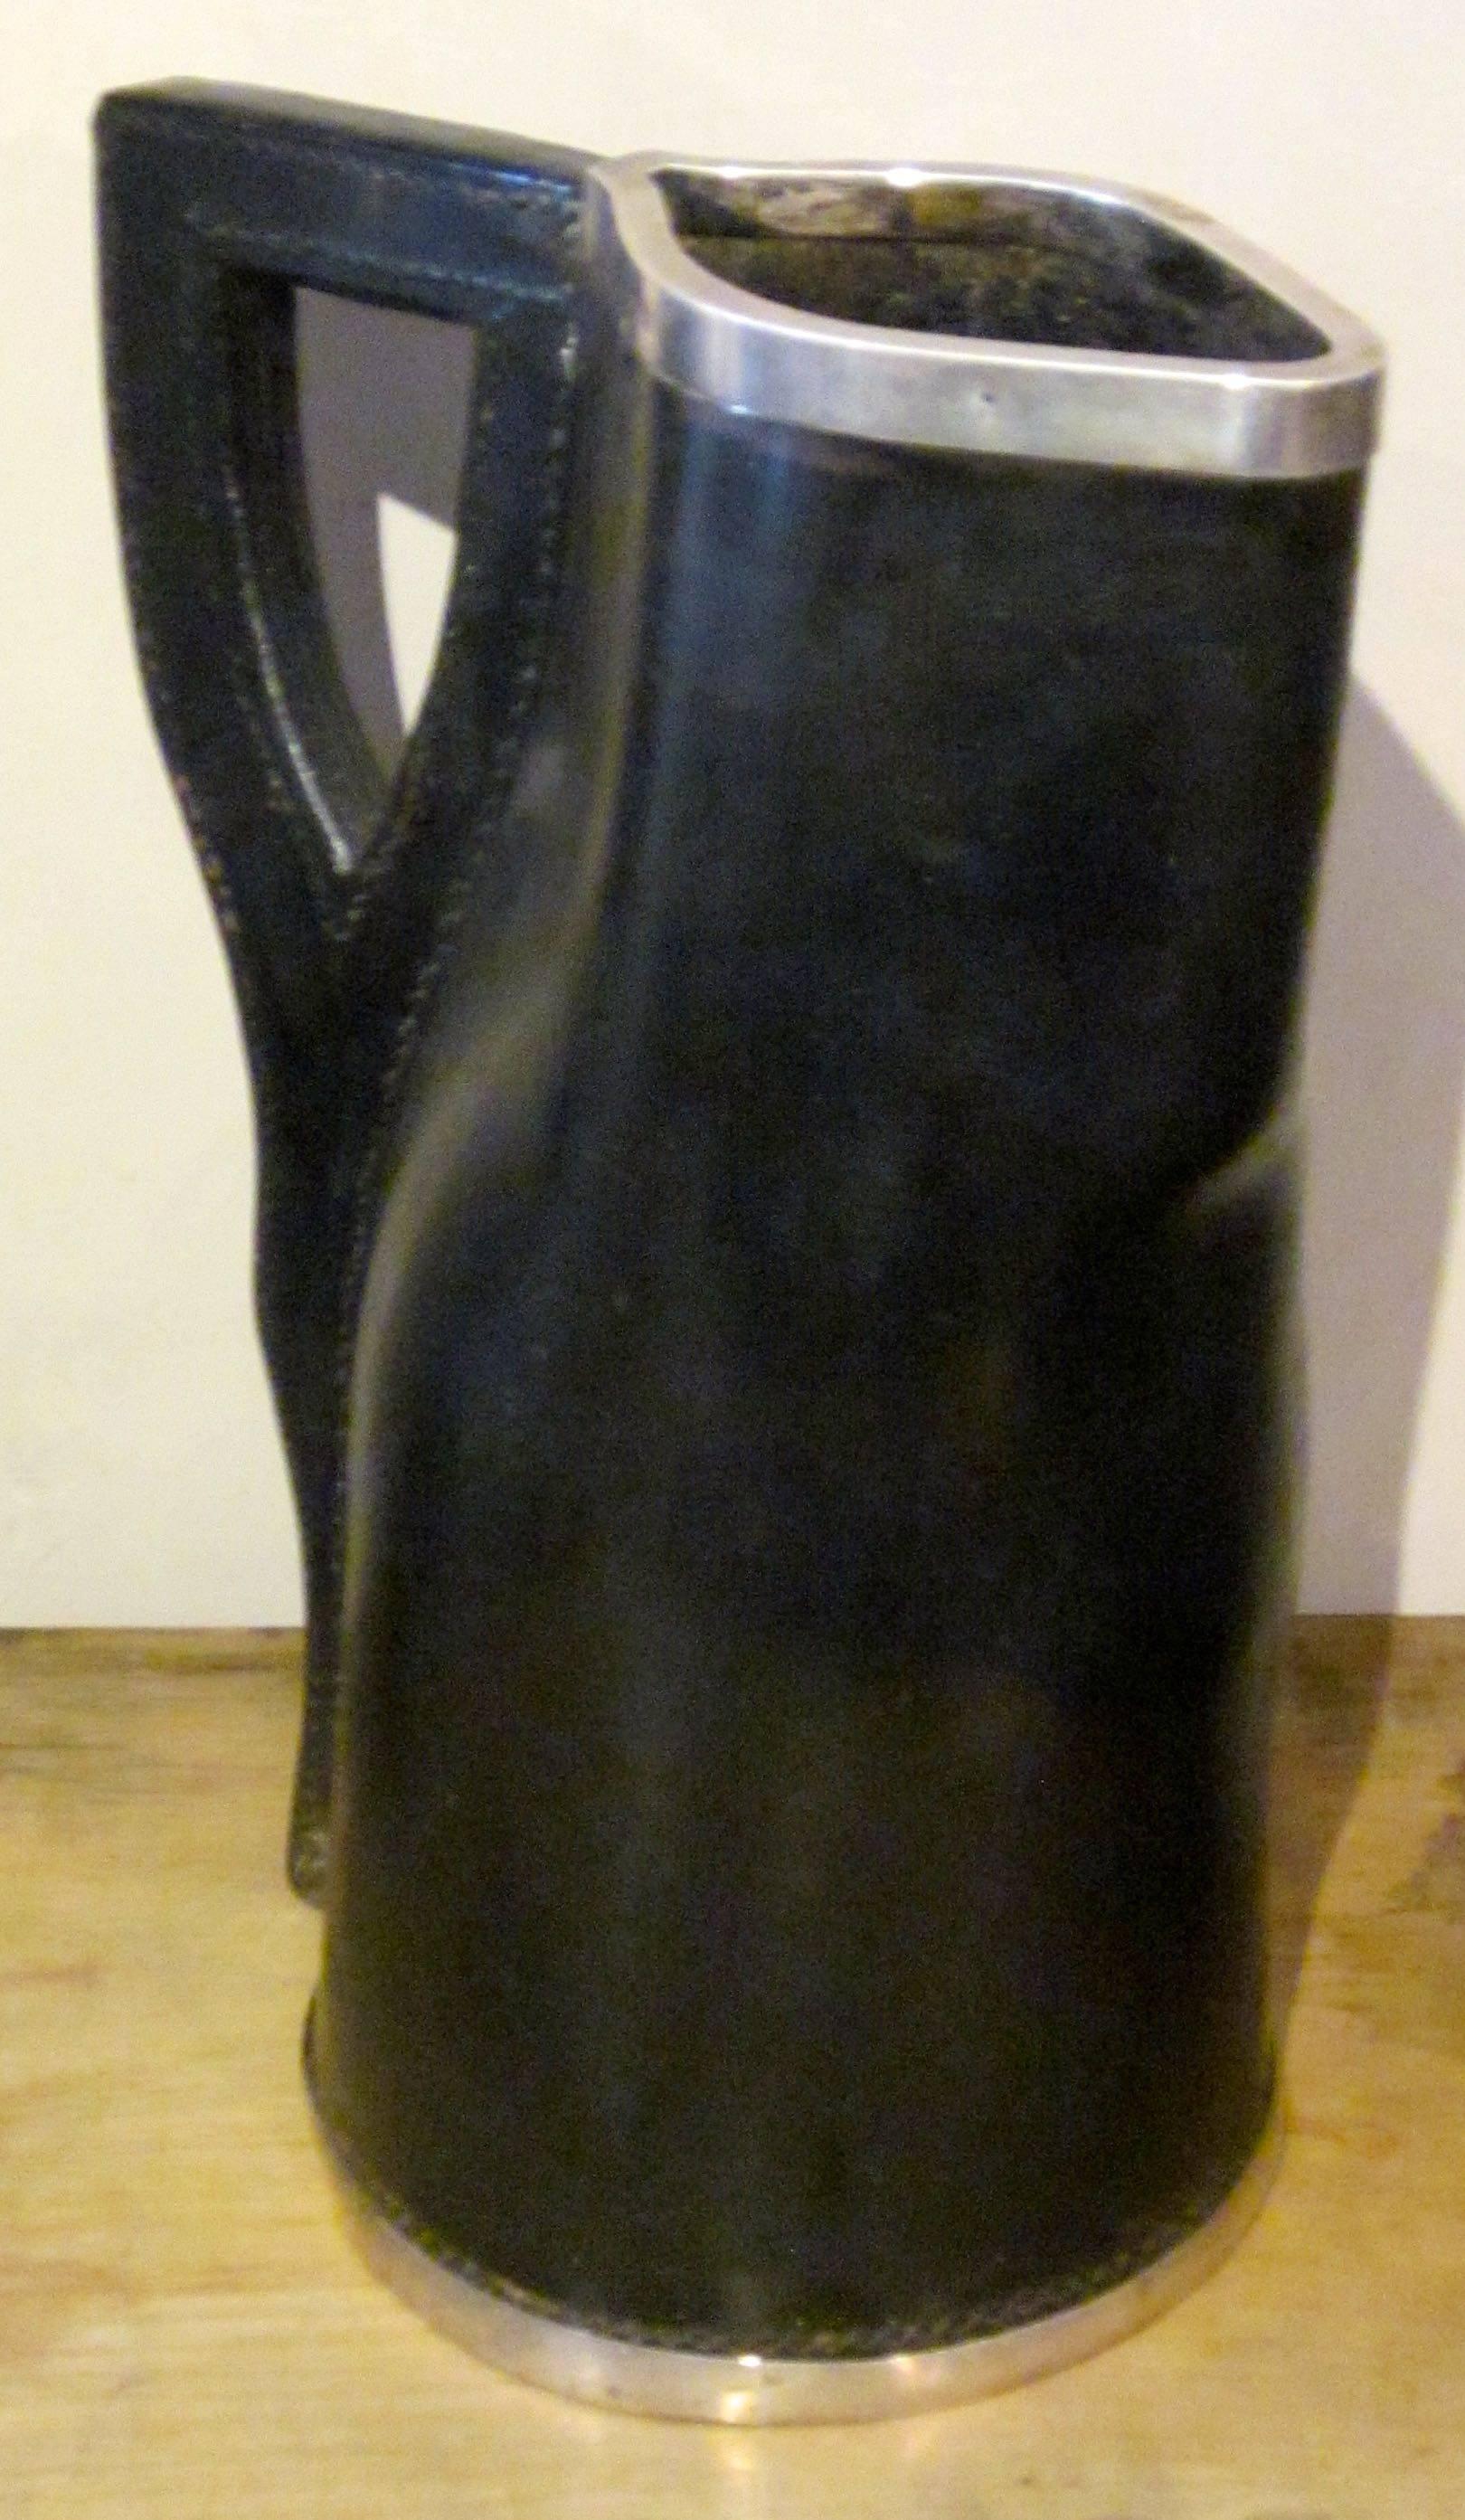 19th century English black leather pitcher has sterling silver trim at top and base.